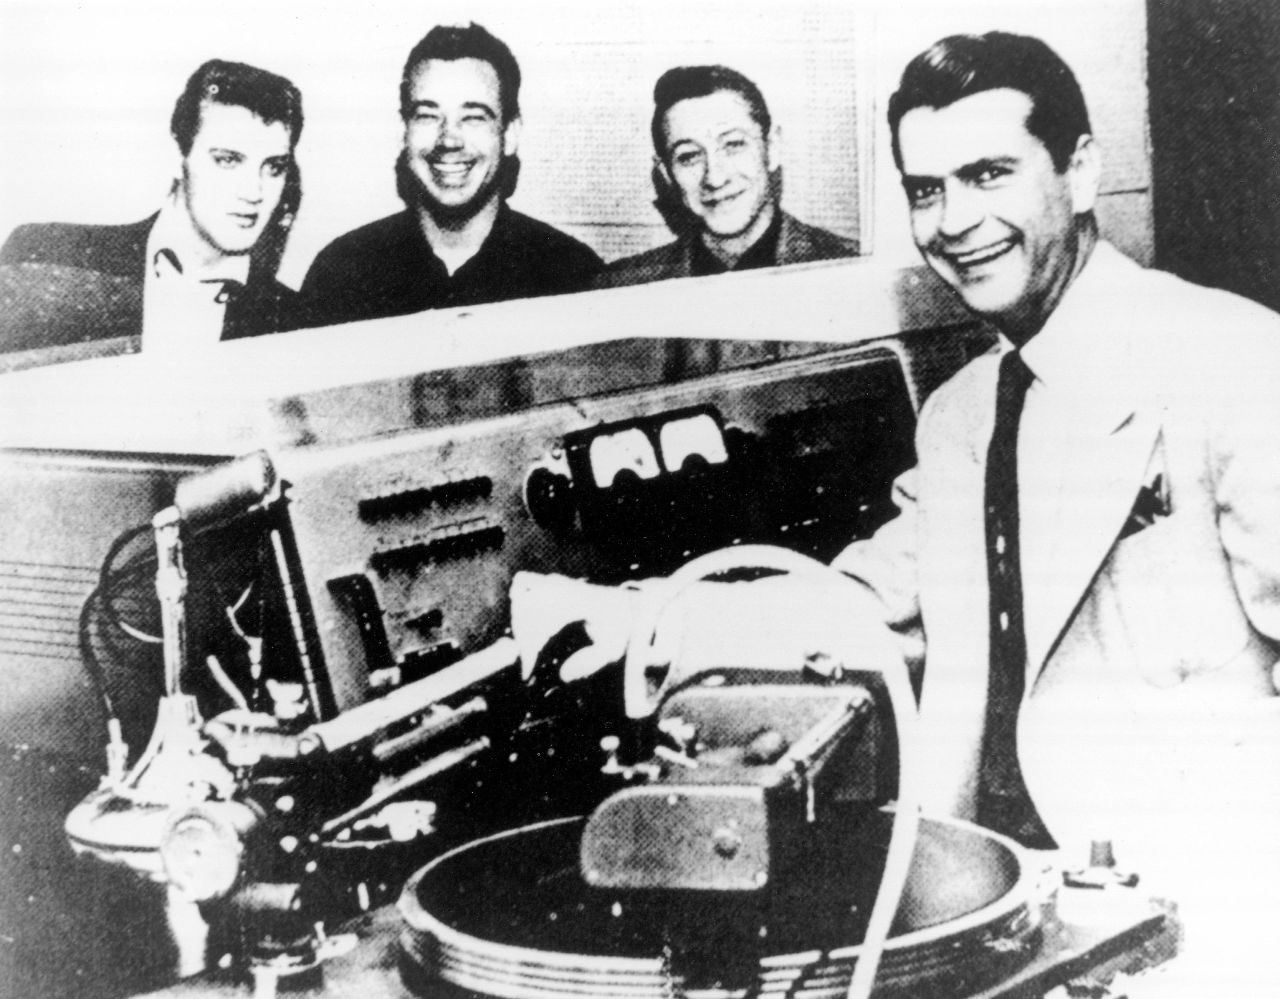 Sam Phillips, right, founded his Memphis Recording Service in 1950 and Sun Records three years later. He helped discover some of the most important talent in rock 'n' roll history, including Elvis Presley, here with Scotty Moore and Bill Black in 1954.  